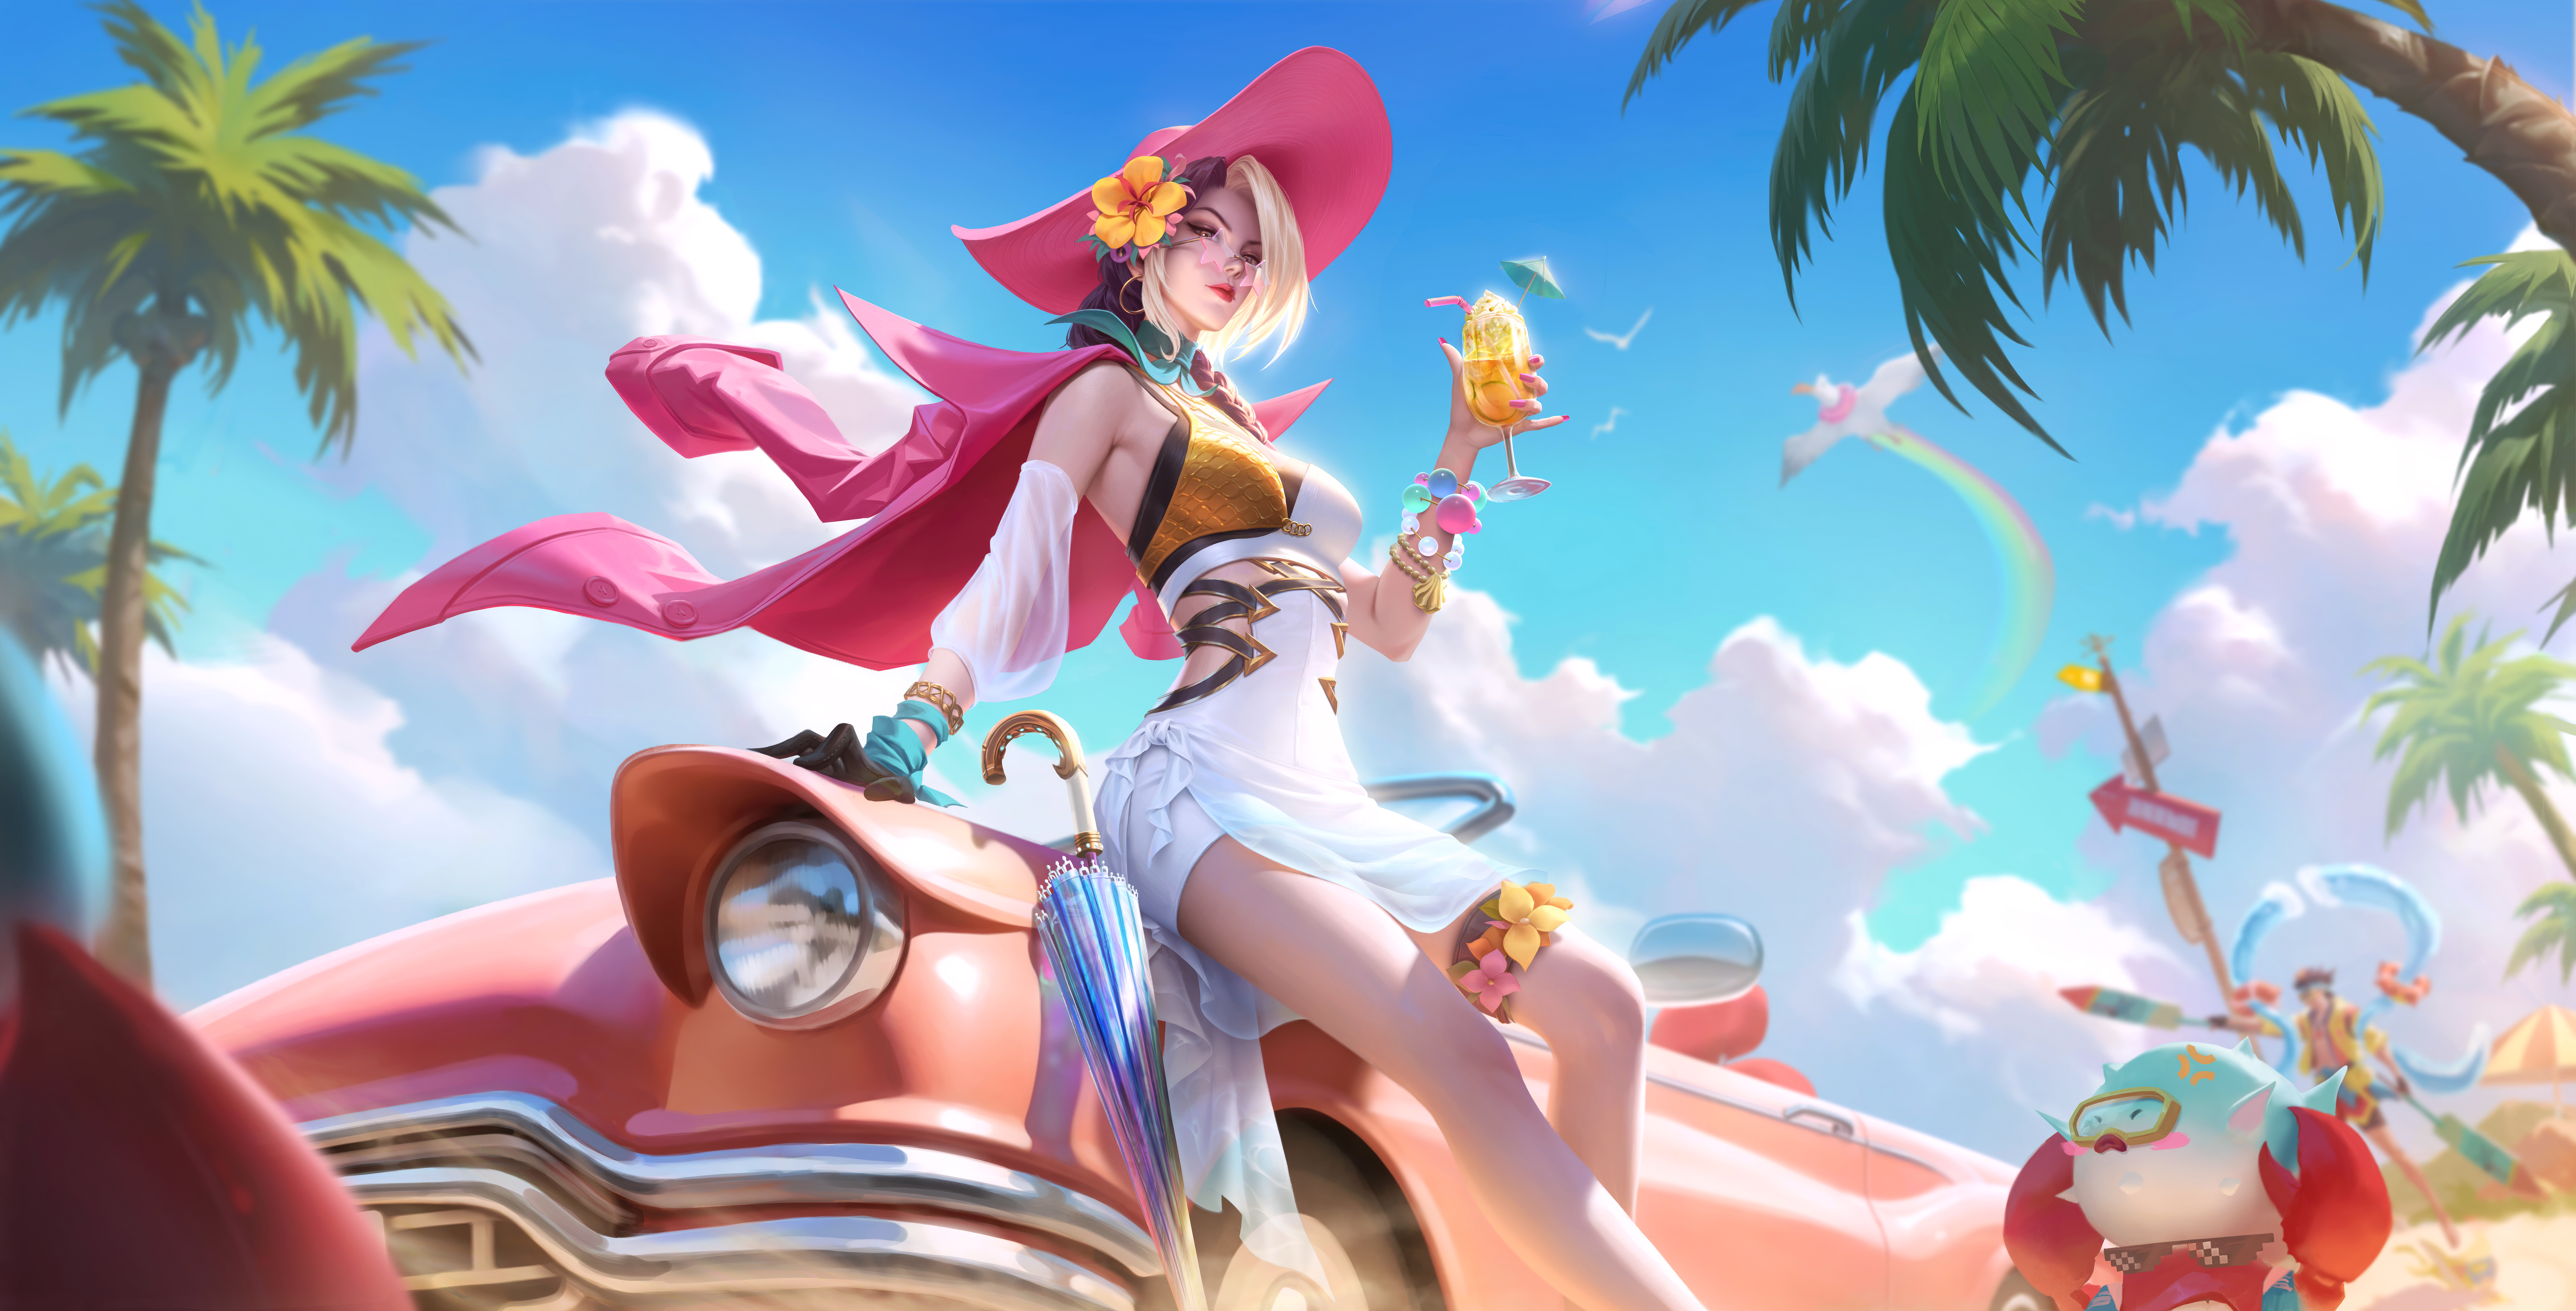 General 8486x4320 Honor of Kings summer carter skirt glass car swimwear two tone hair hat video game characters video game girls clouds video games sky palm trees umbrella flower in hair low-angle